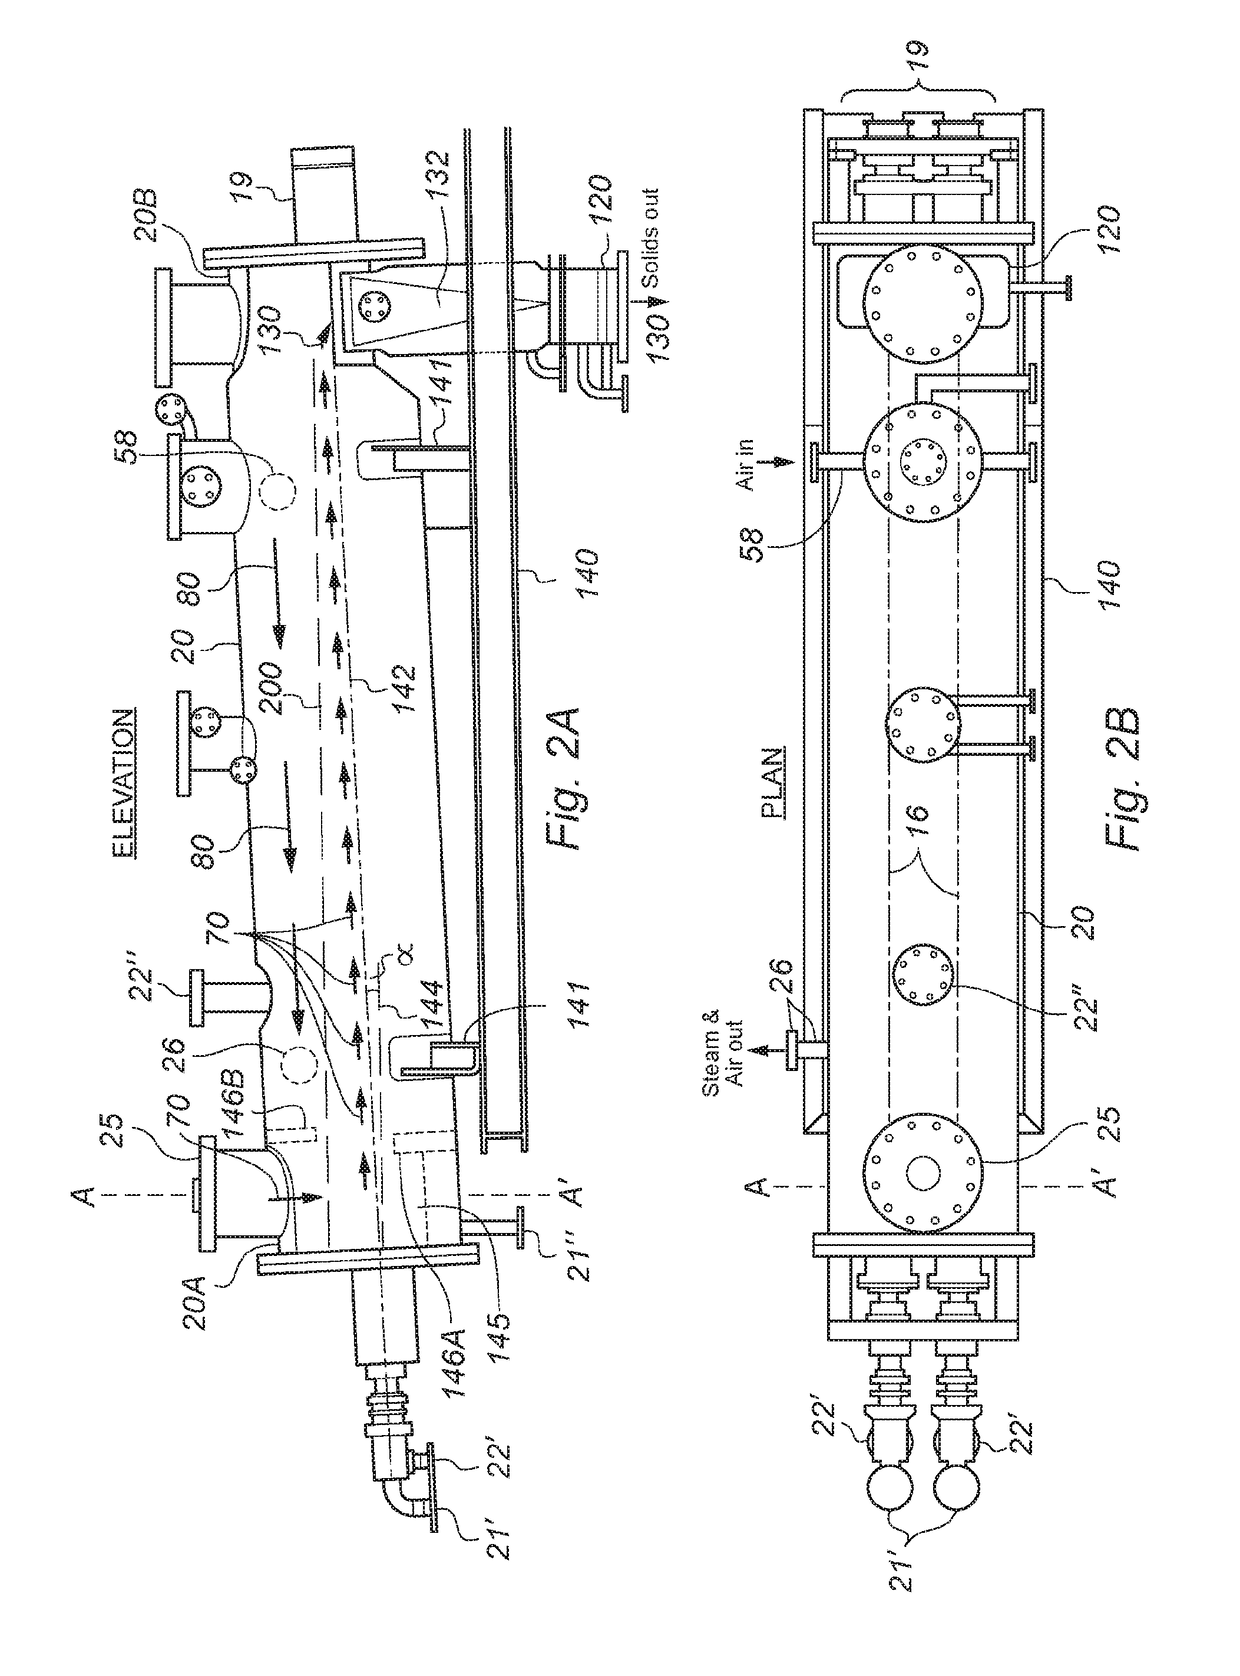 Method(s) and Apparatus For Treating Waste